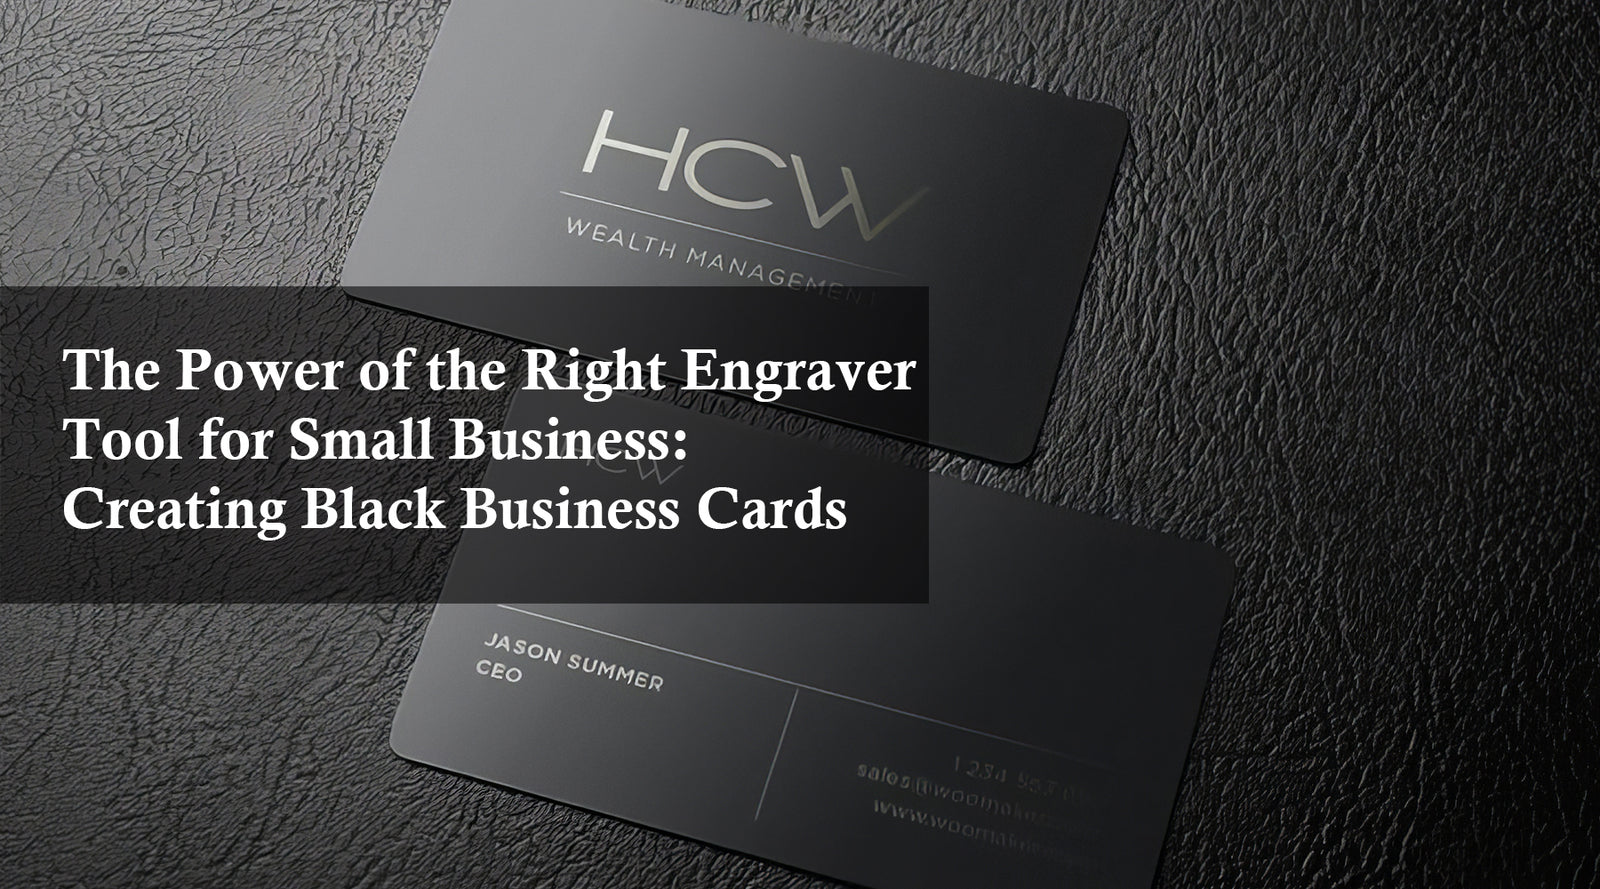 The Power of the Right Engraver Tool for Small Business: Creating Black Business Cards